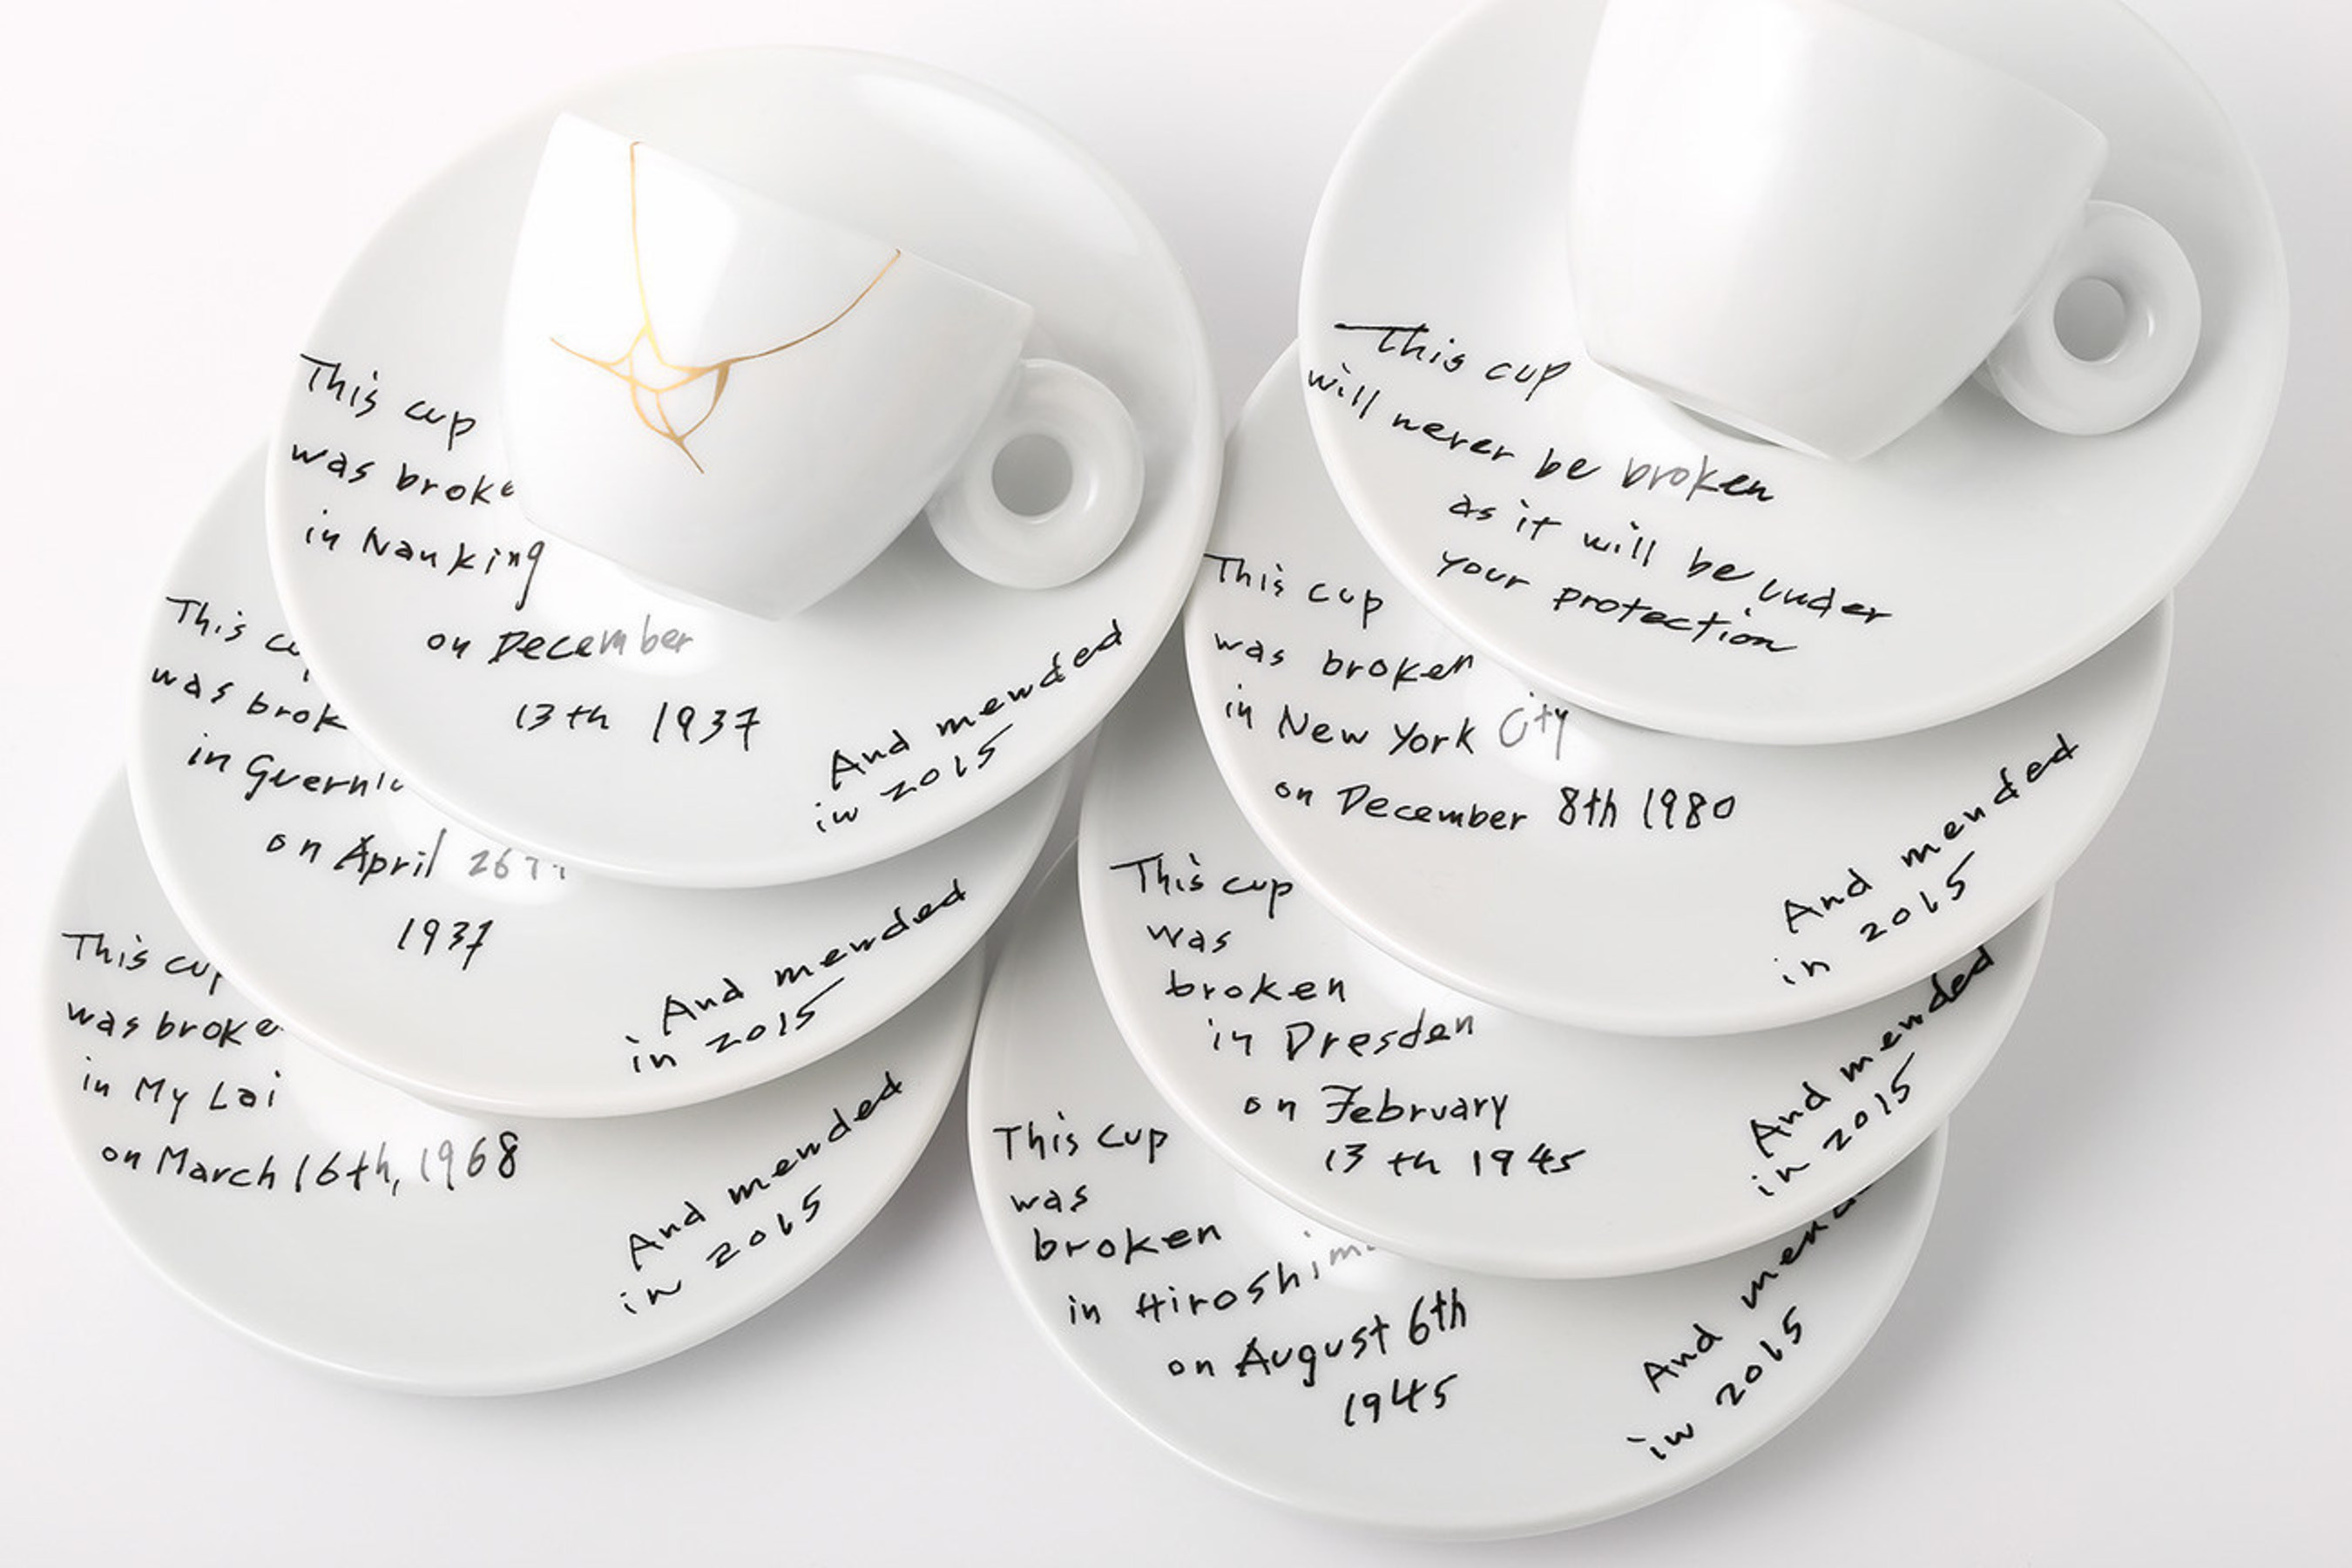 Yoko Ono: Mended Cups - illy Art Collection will be live on http://www.moma.org on 5/8. *Image provided by illy North America showing the newest collaboration for the illy Art Collection of espresso cups and saucers